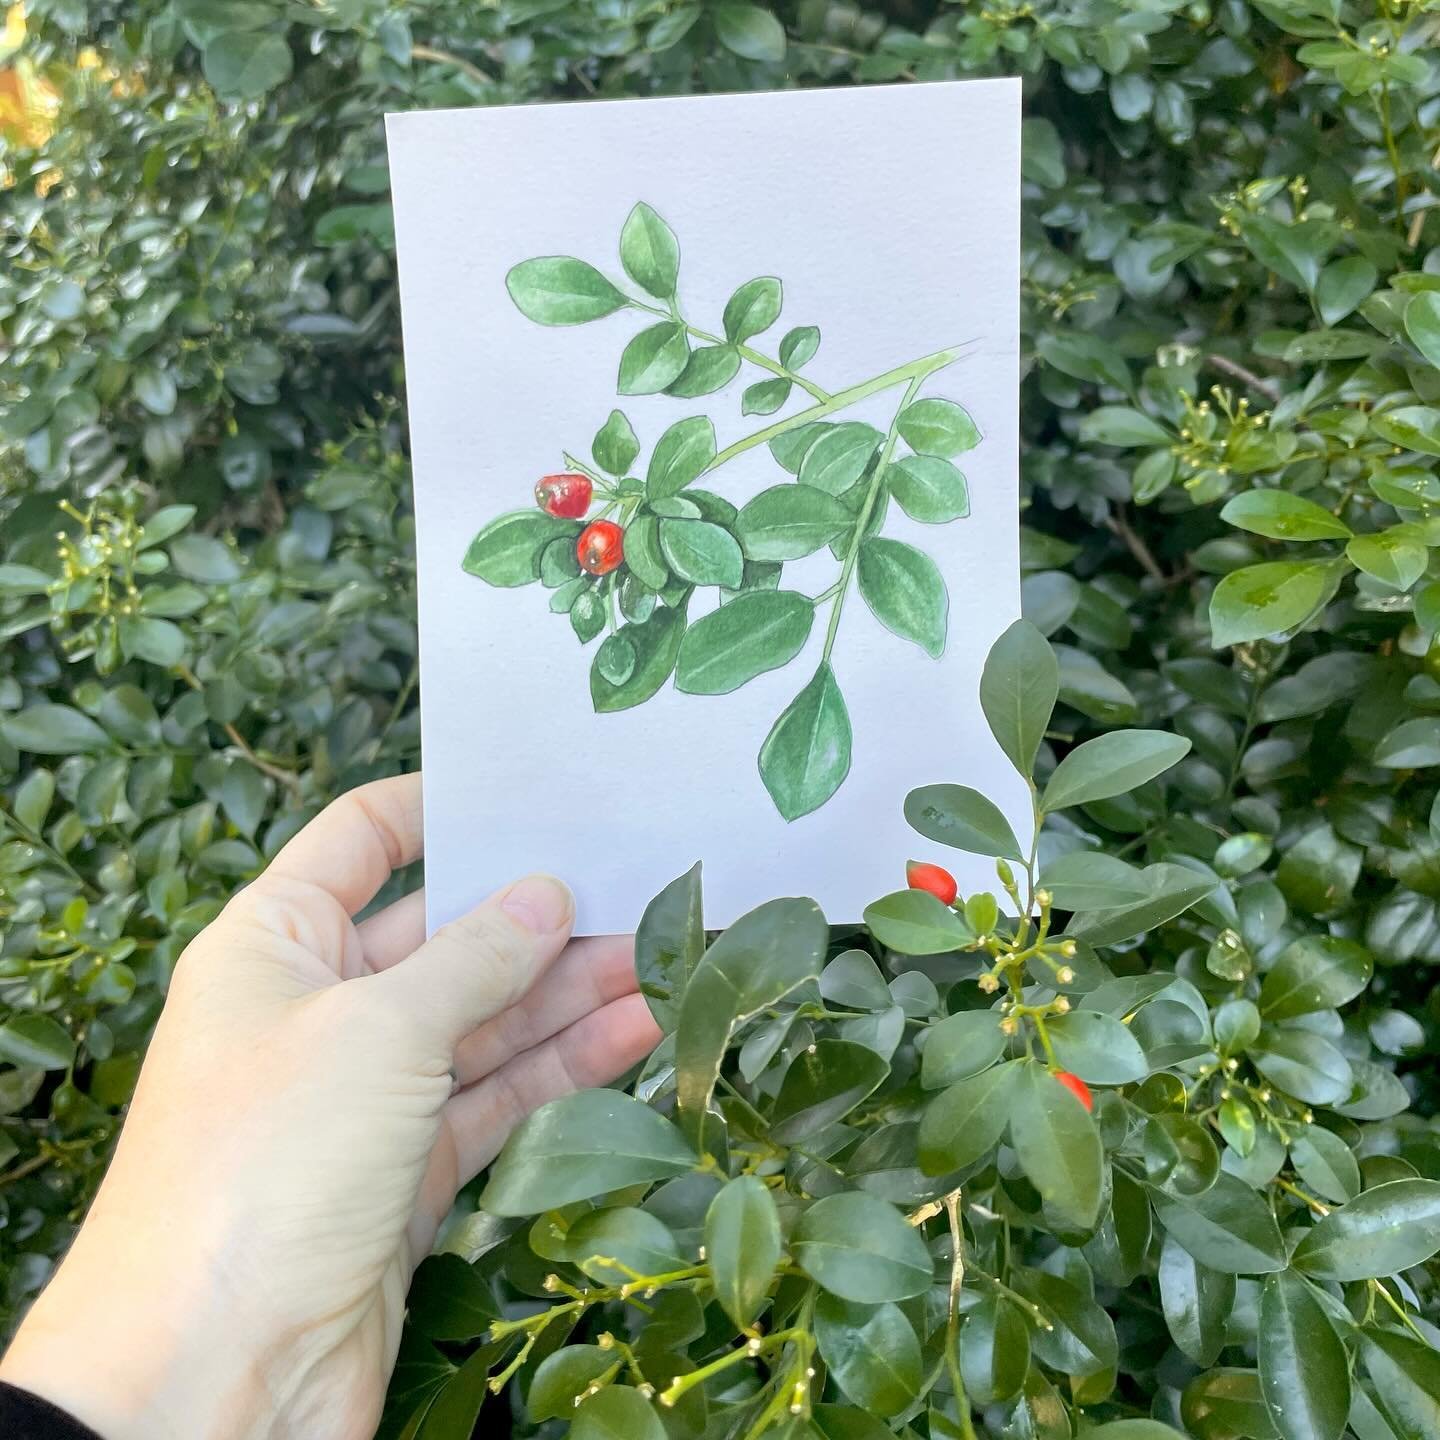 This plant is Murraya paniculata which is growing in our front yard. I love the bright red berries against the contrasting green foliage. The shiny leaves were an enjoyable challenge! What creative challenge have you been enjoying lately? 

#naturear